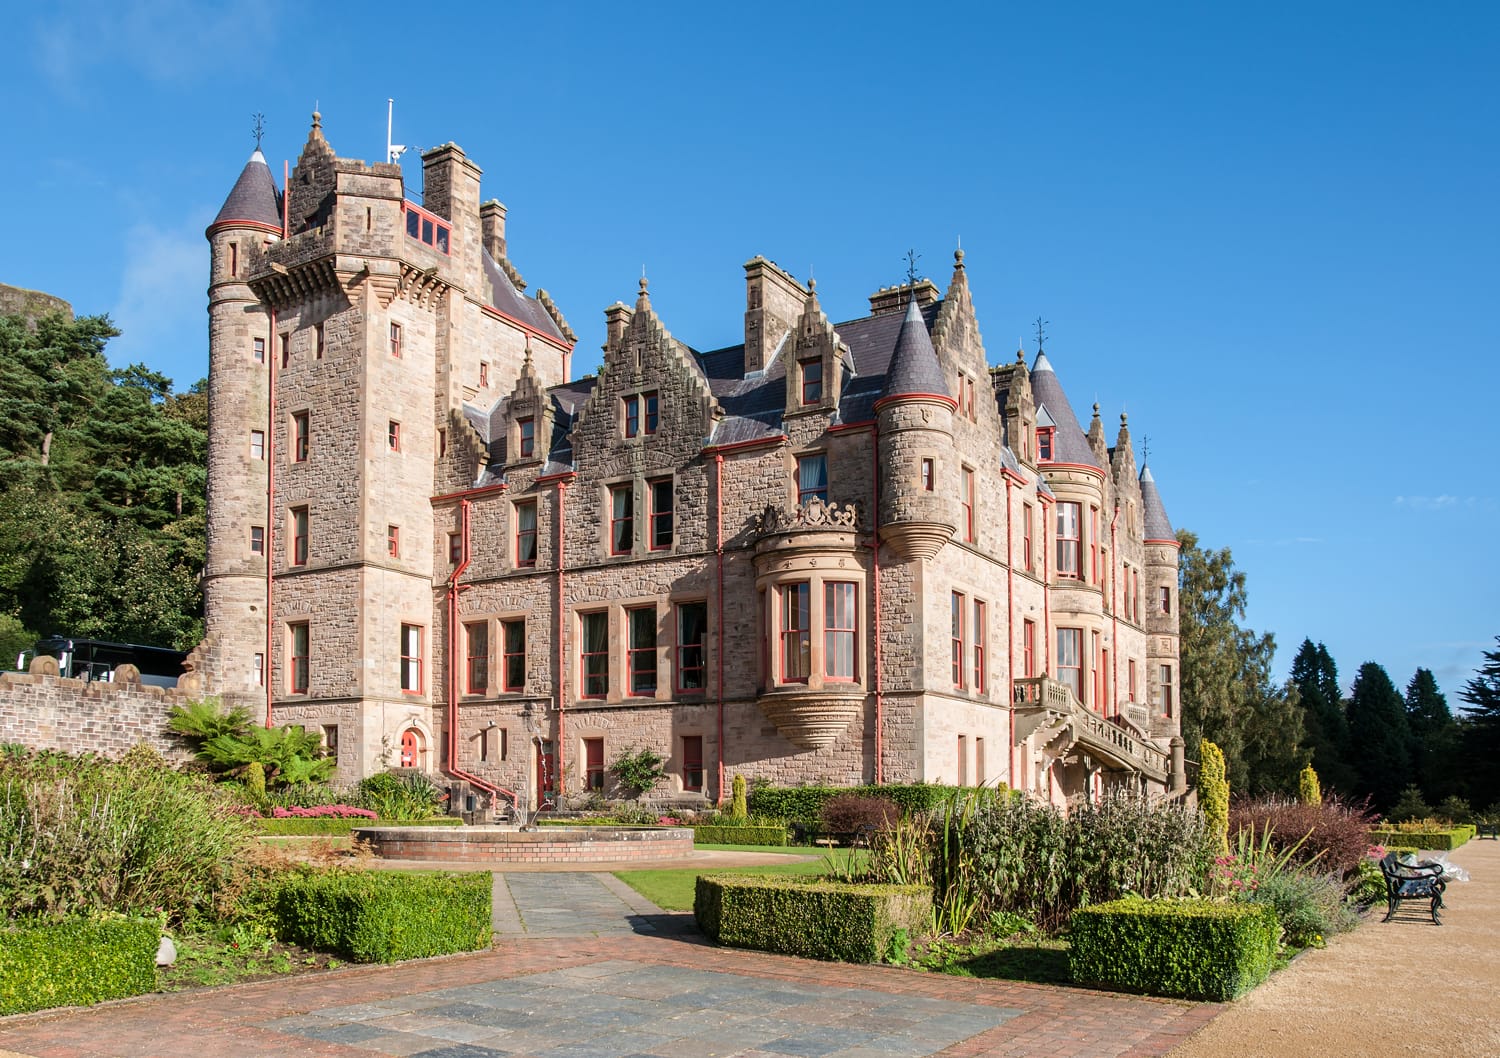 Belfast castle. Tourist attraction on the slopes of Cavehill Country Park in Belfast, Northern Ireland